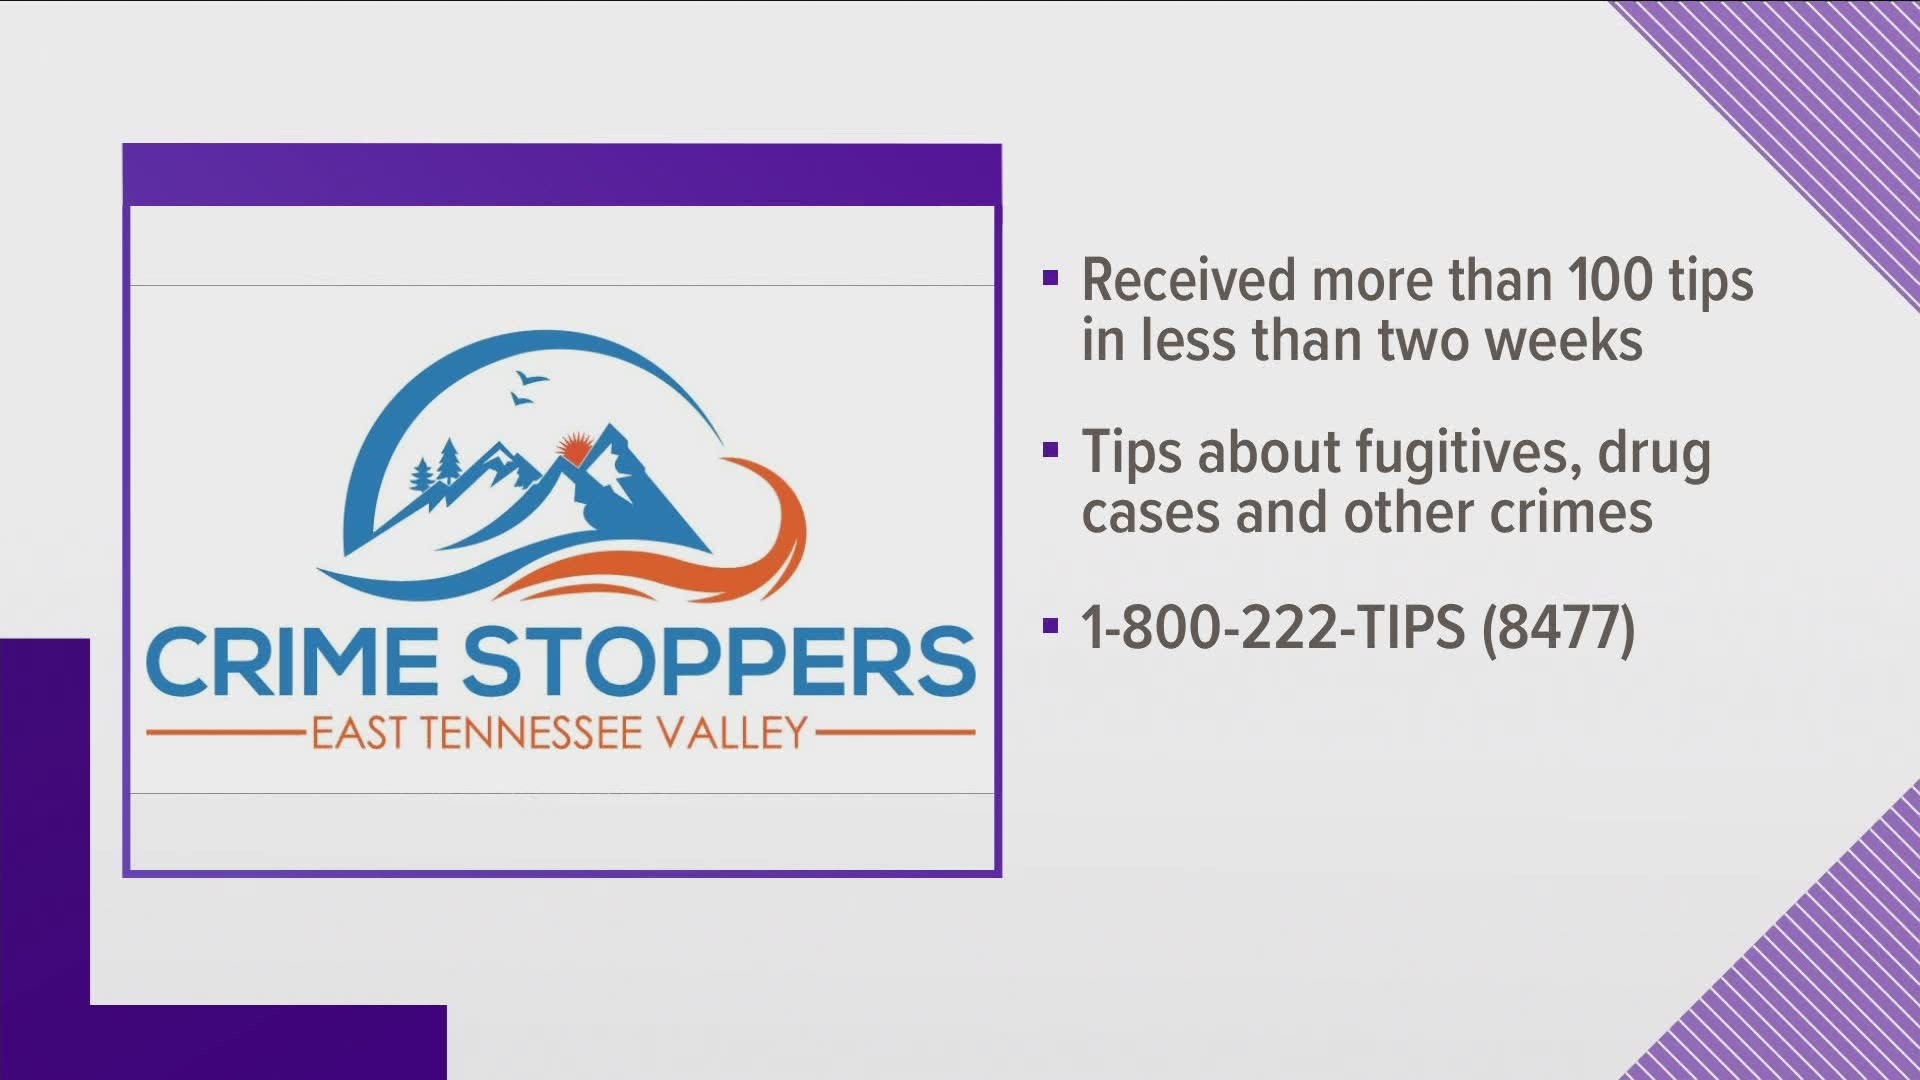 The new Crime Stoppers of the East Tennessee Valley says it wants the public's tips to help address crime.